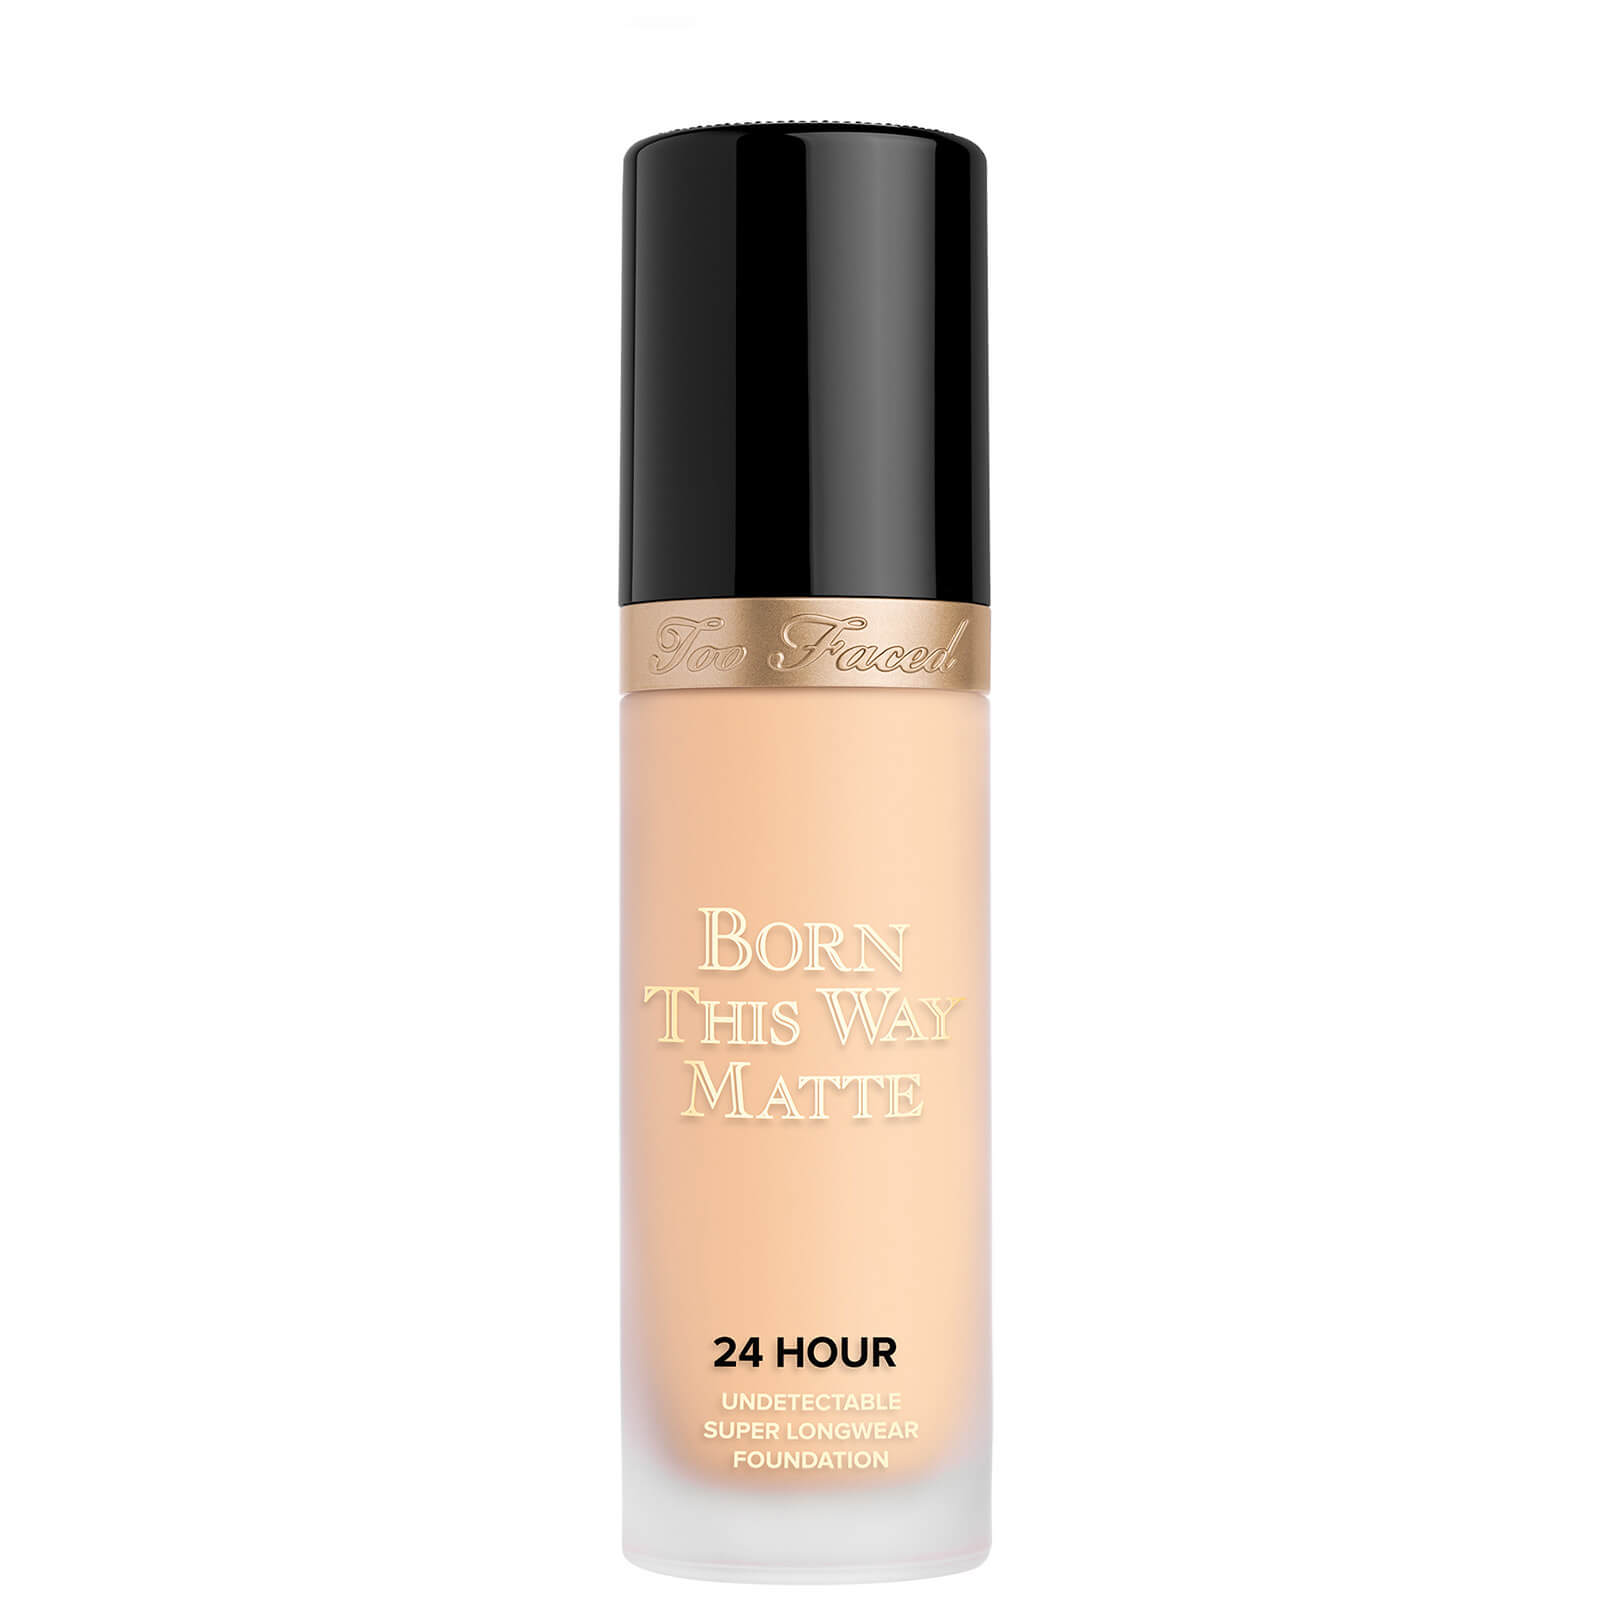 Too Faced Born This Way Matte 24 Hour Long-Wear Foundation 30ml (Various Shades) - Vanilla